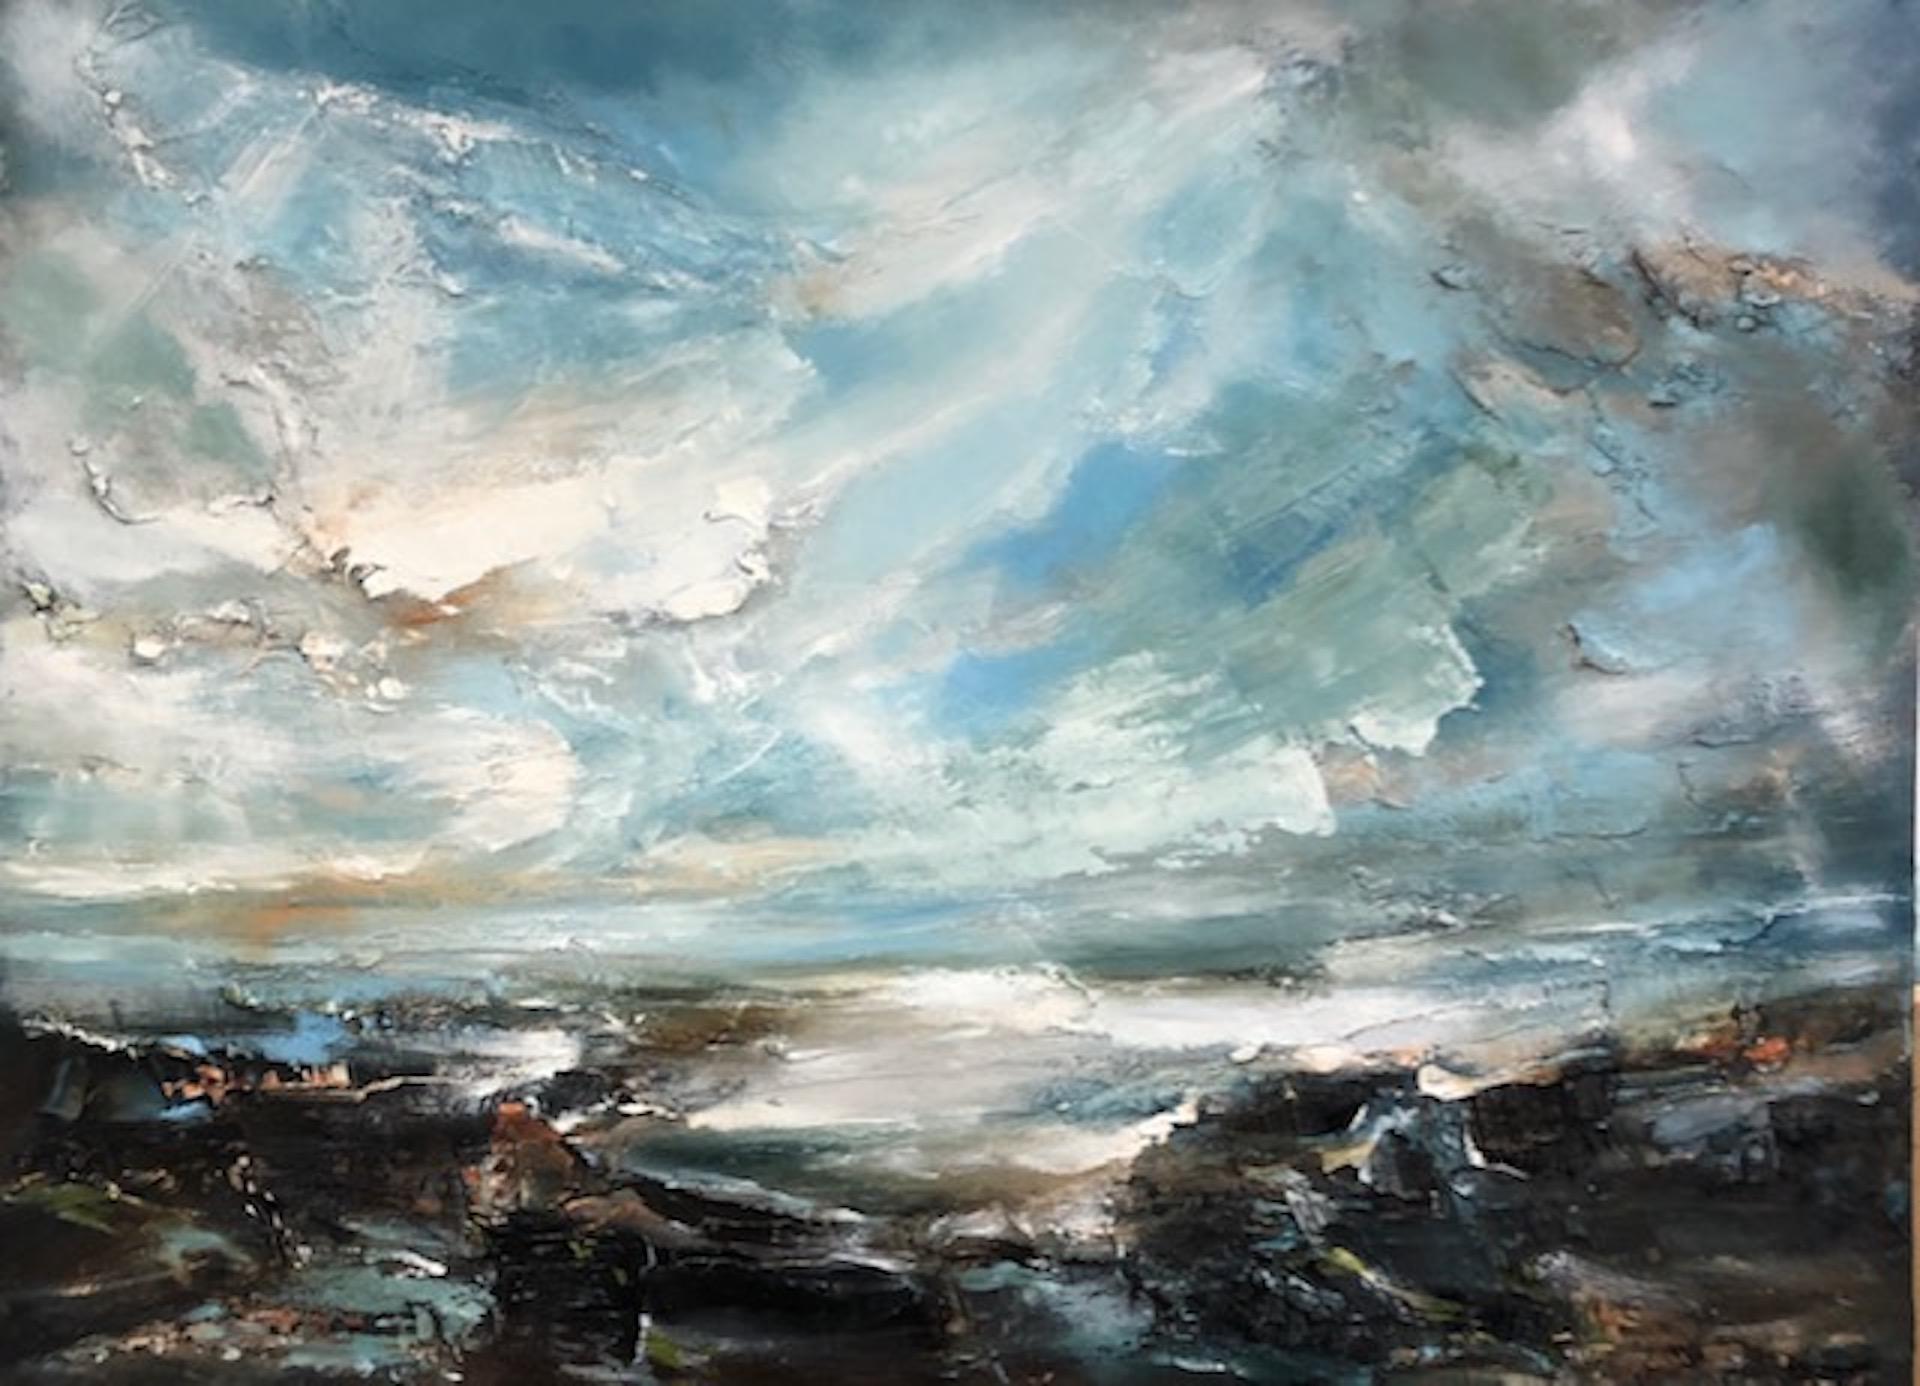 Helen Howells
Light across the Estuary
Original Oil Painting on Canvas
Oil Paint on Canvas
Canvas size: H 76 cm x W 102 cm x D 3.5cm
Sold – Unframed

(Please note that in situ images are purely an indication of how a piece may look)

Light across